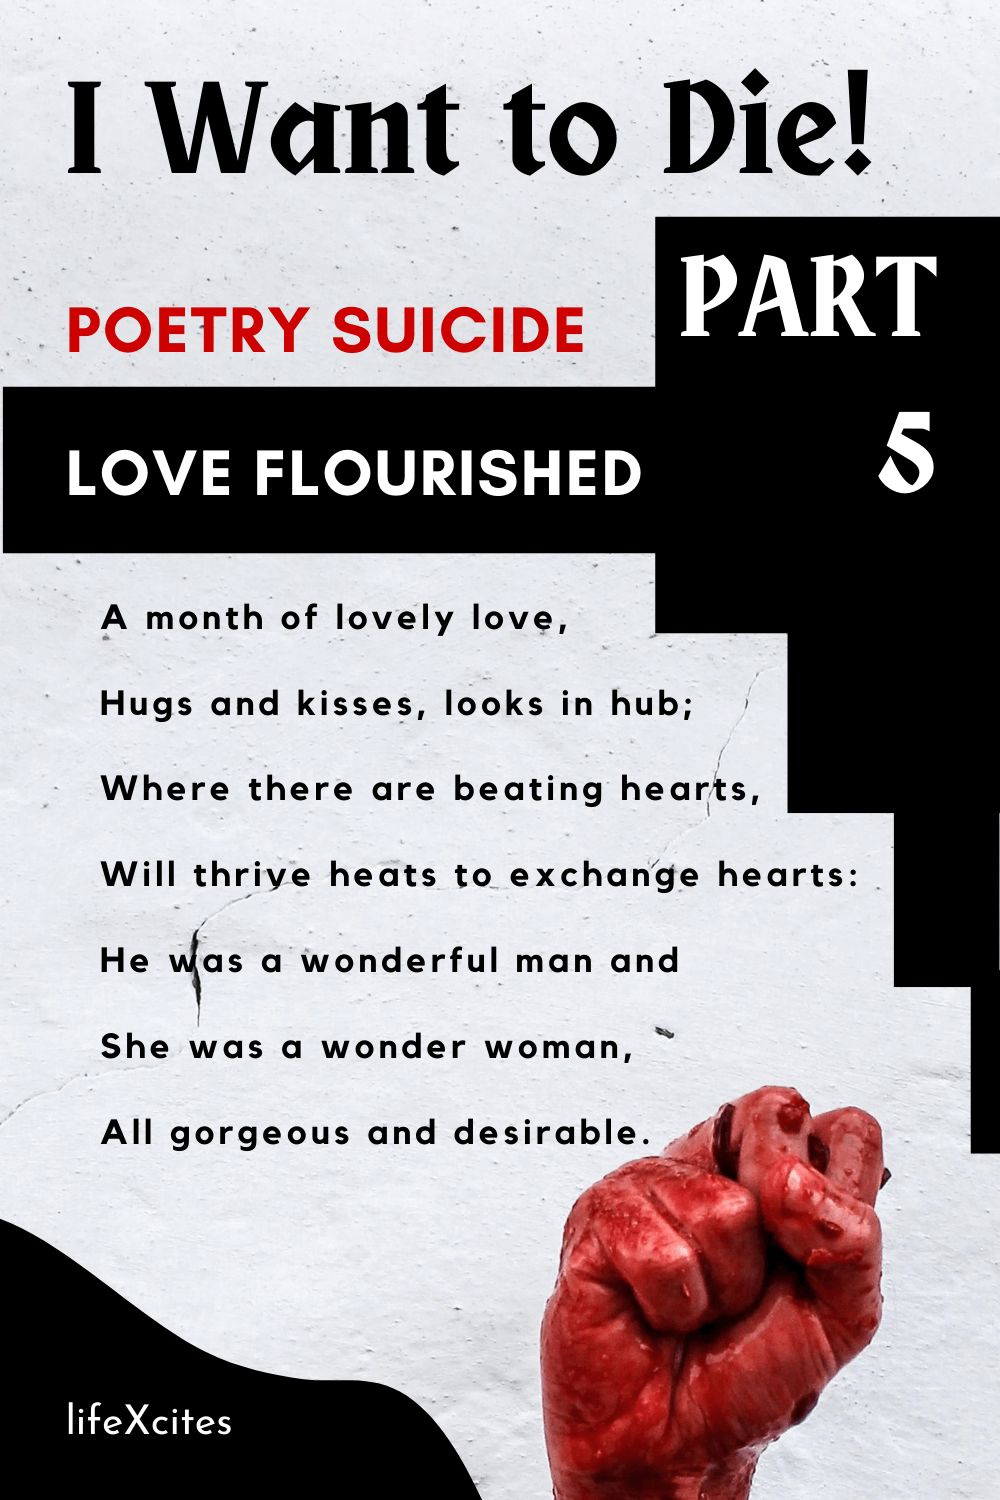 I Want to Die! Poetry Suicide Love Flourished Part 5